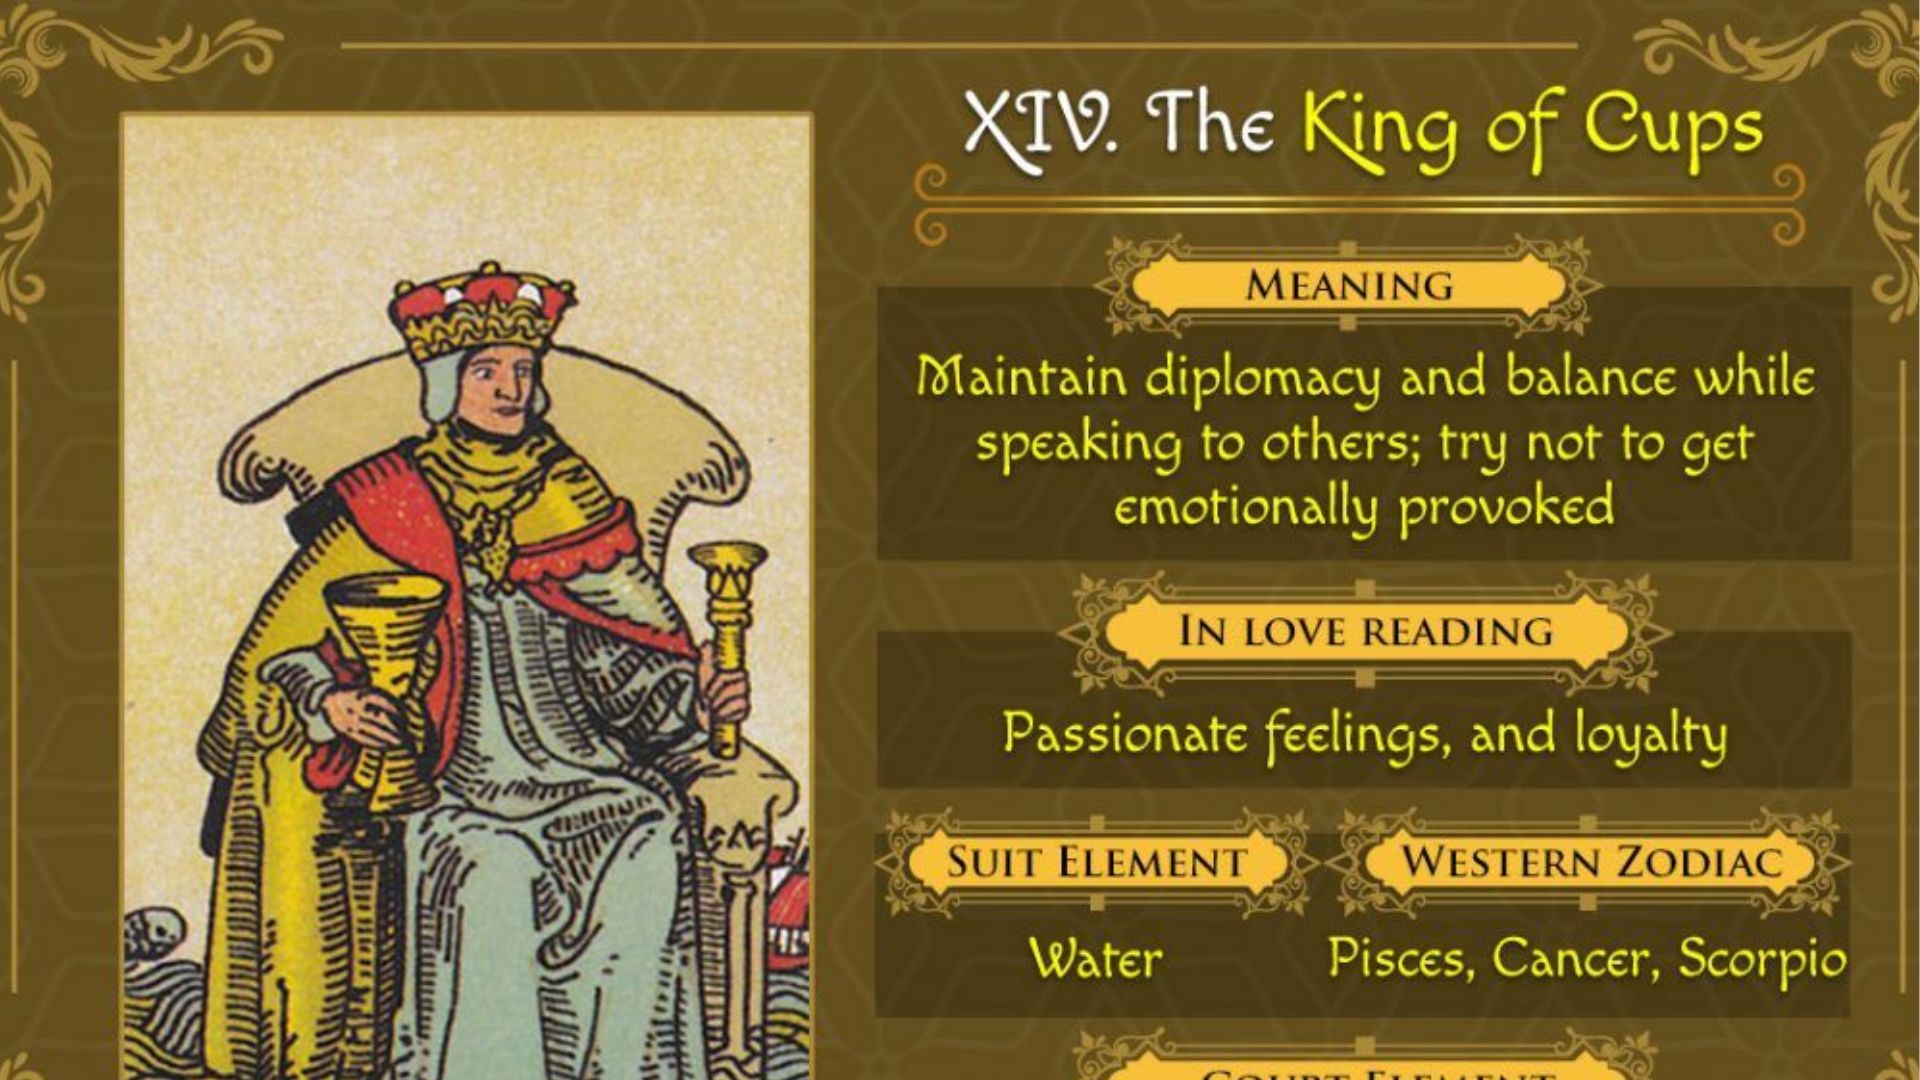 King of Cup Tarot Card With Description